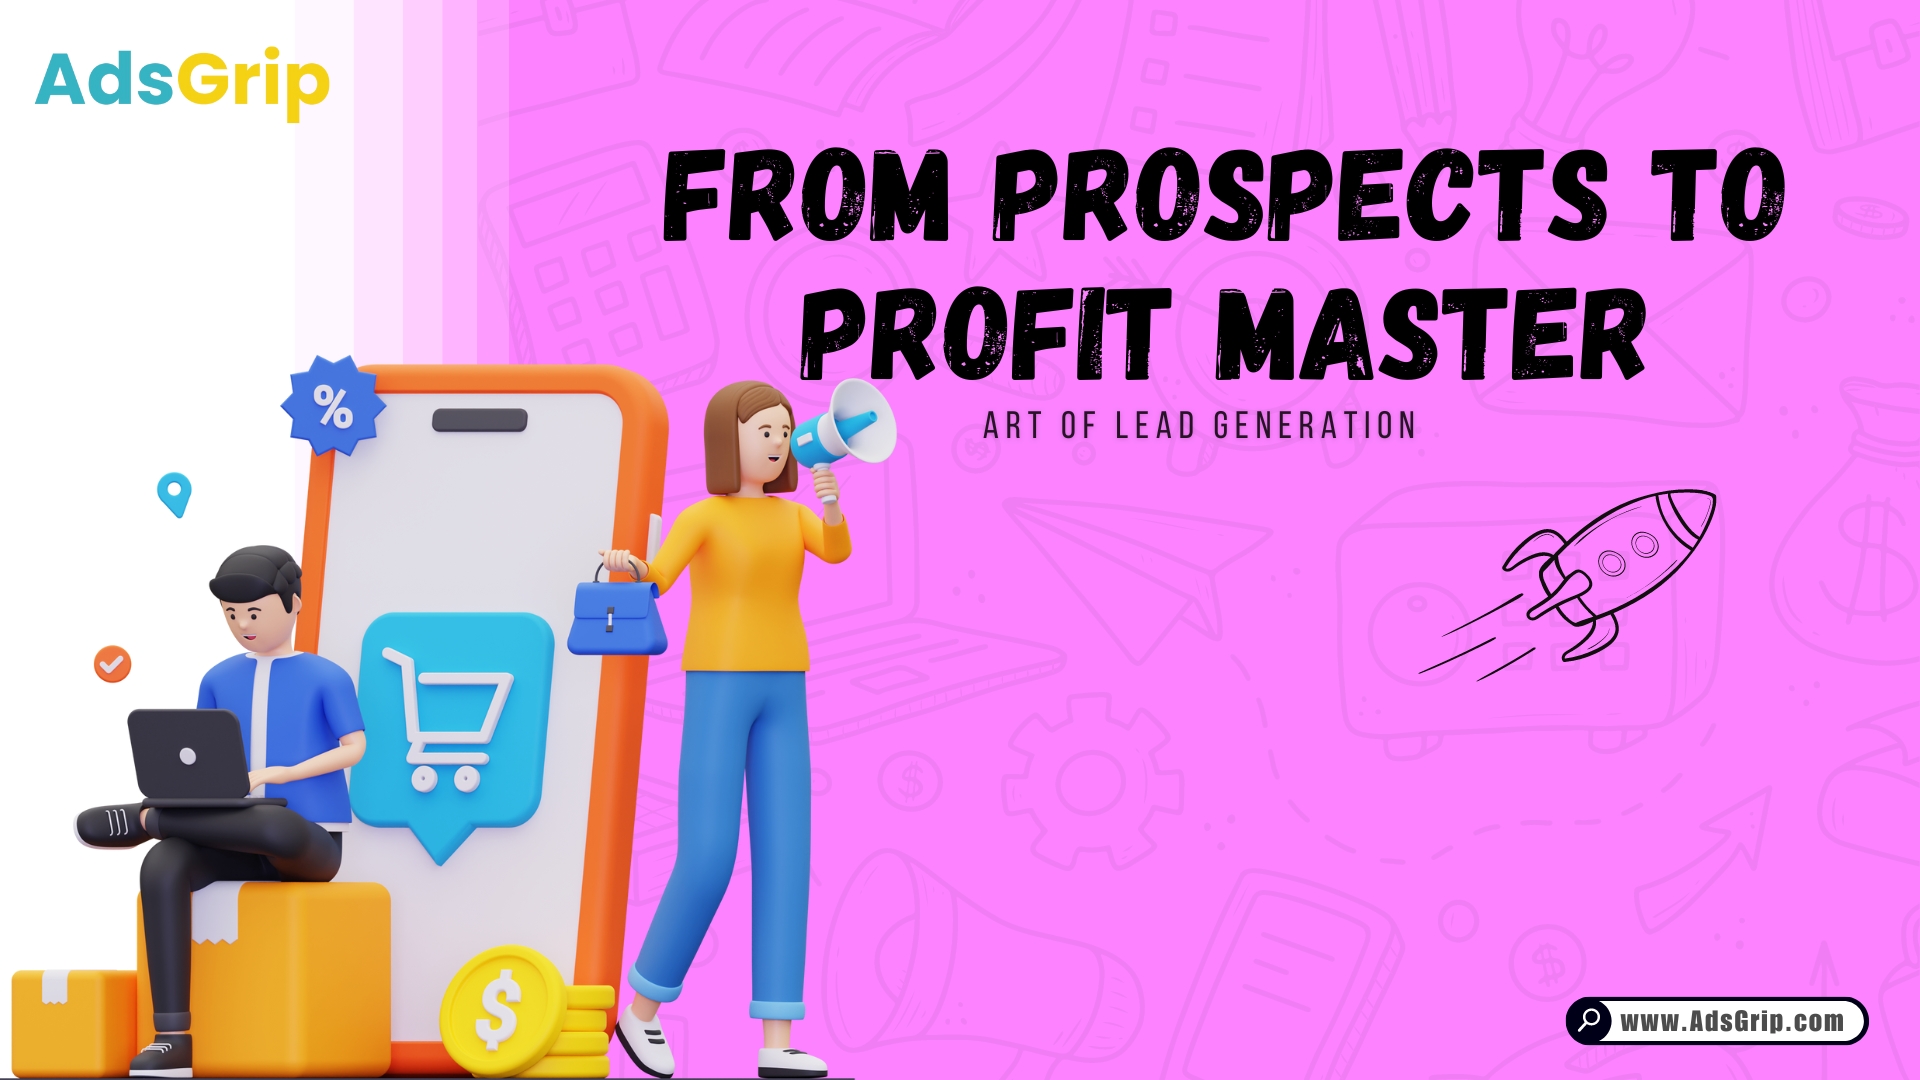 From Prospects to Profit Master the Art of Lead Generation